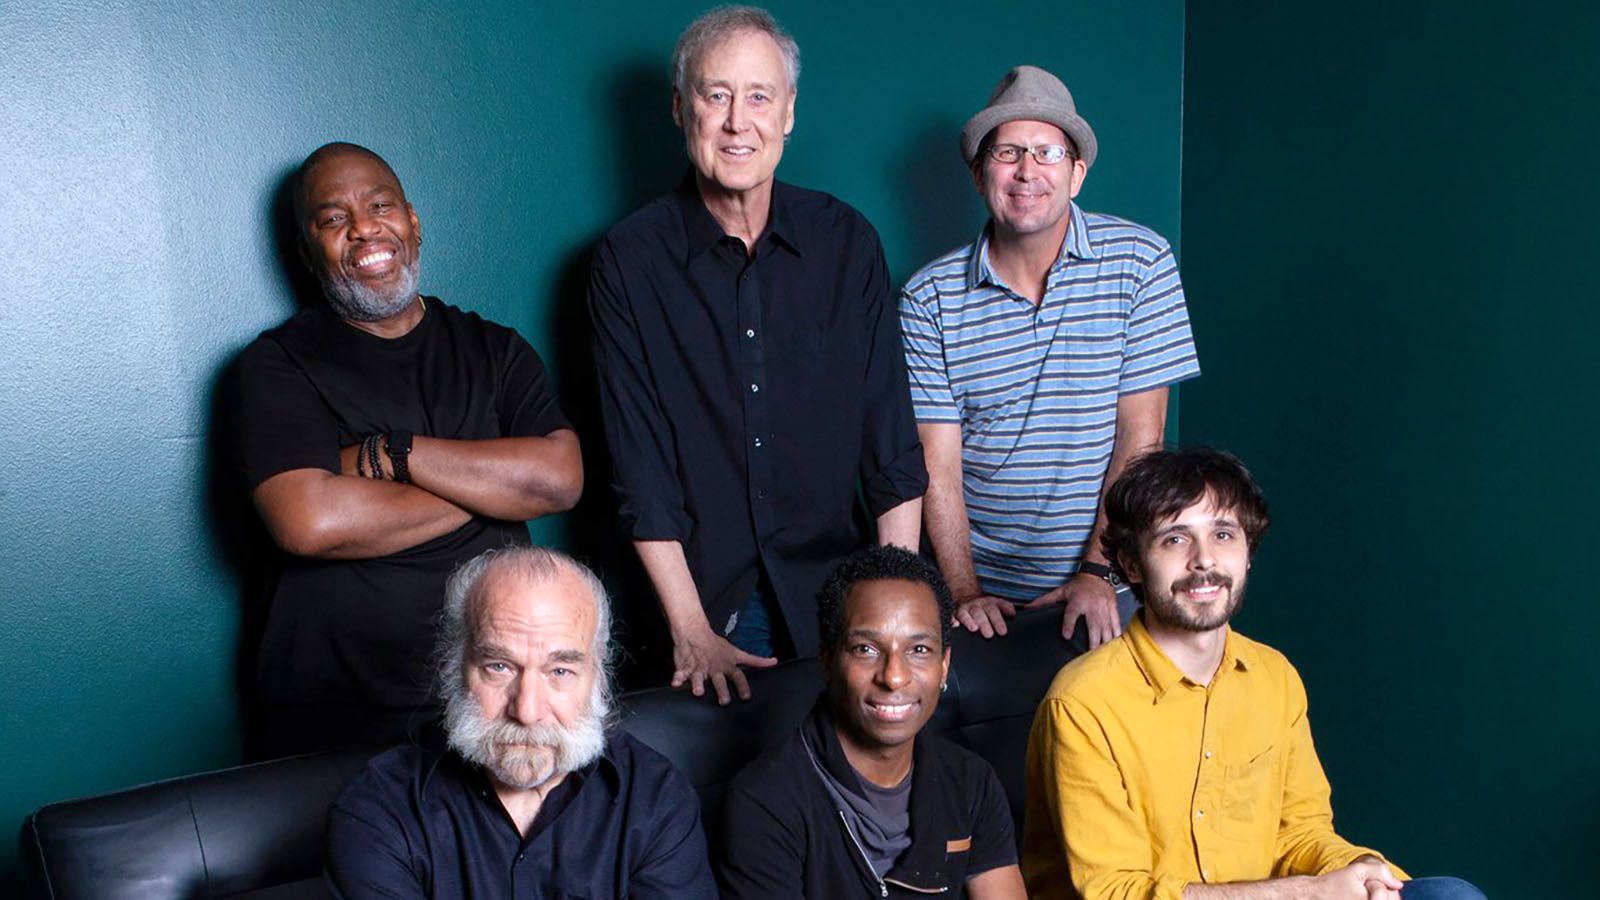 Bruce Hornsby & The Noisemakers will be at The Clyde Theatre on Sept. 17.